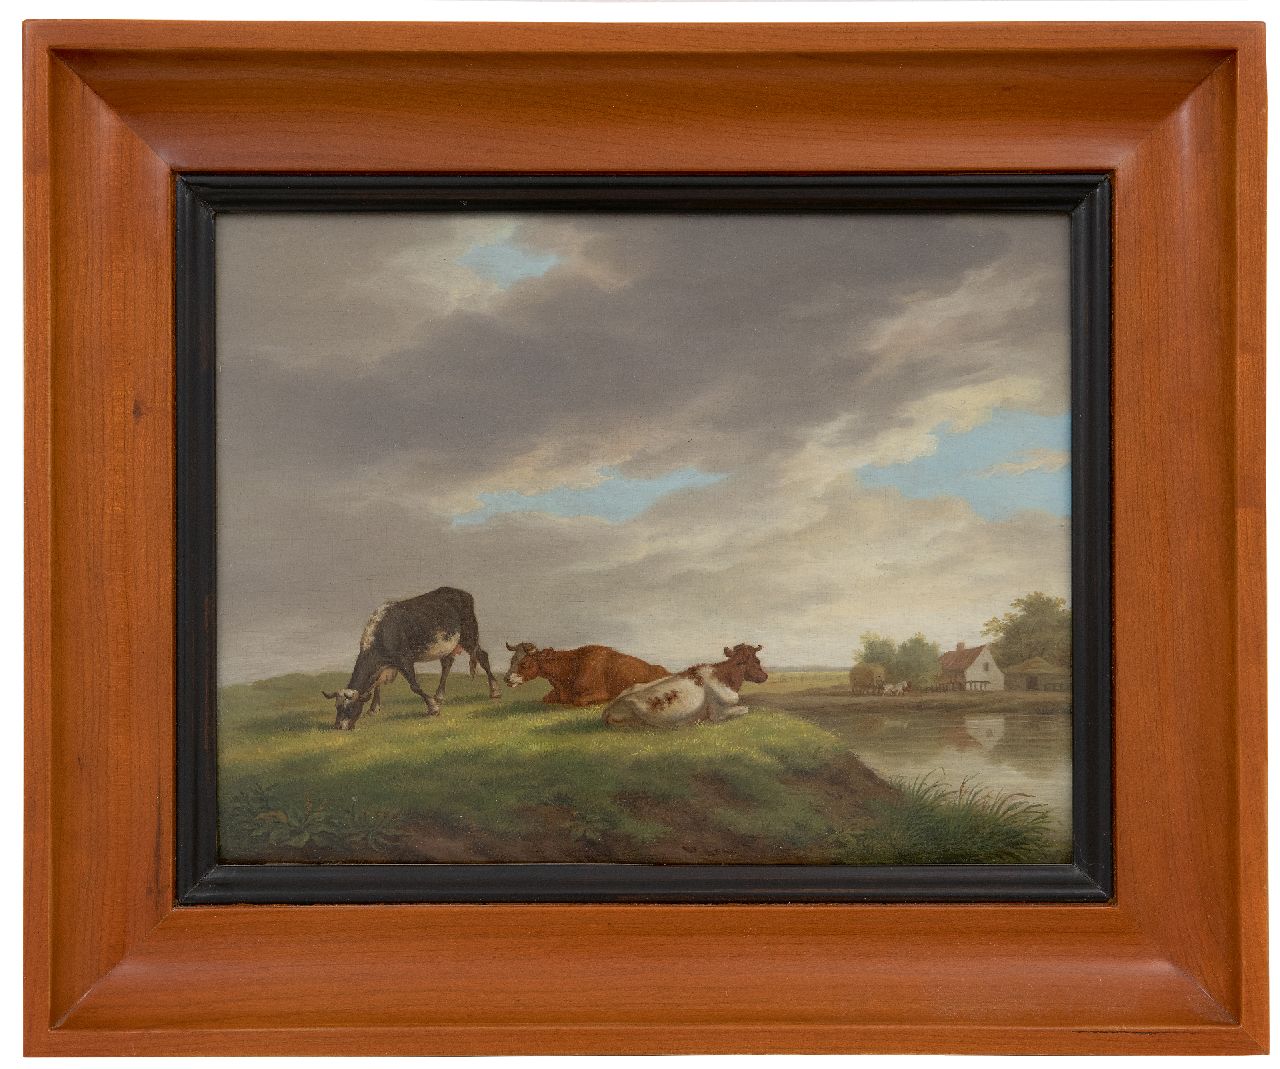 Burgh H.A. van der | Hendrik Adam van der Burgh | Paintings offered for sale | Cows in a landscape with a farm, oil on panel 20.4 x 26.3 cm, signed l.l. and painted 1821